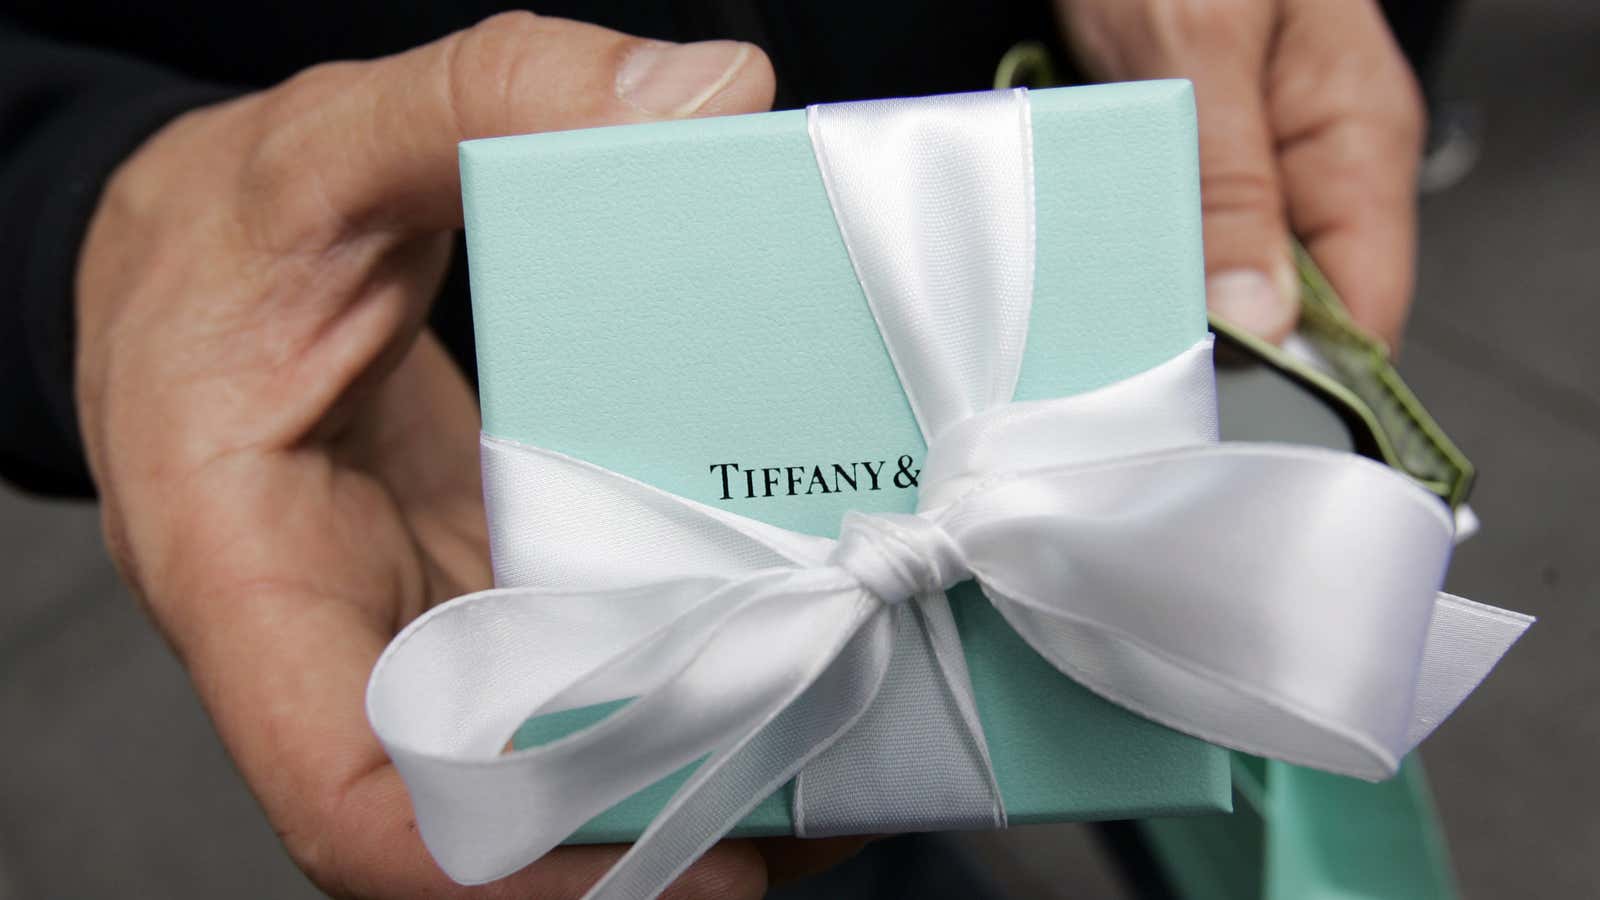 A welcome surprise inside for Tiffany investors today.